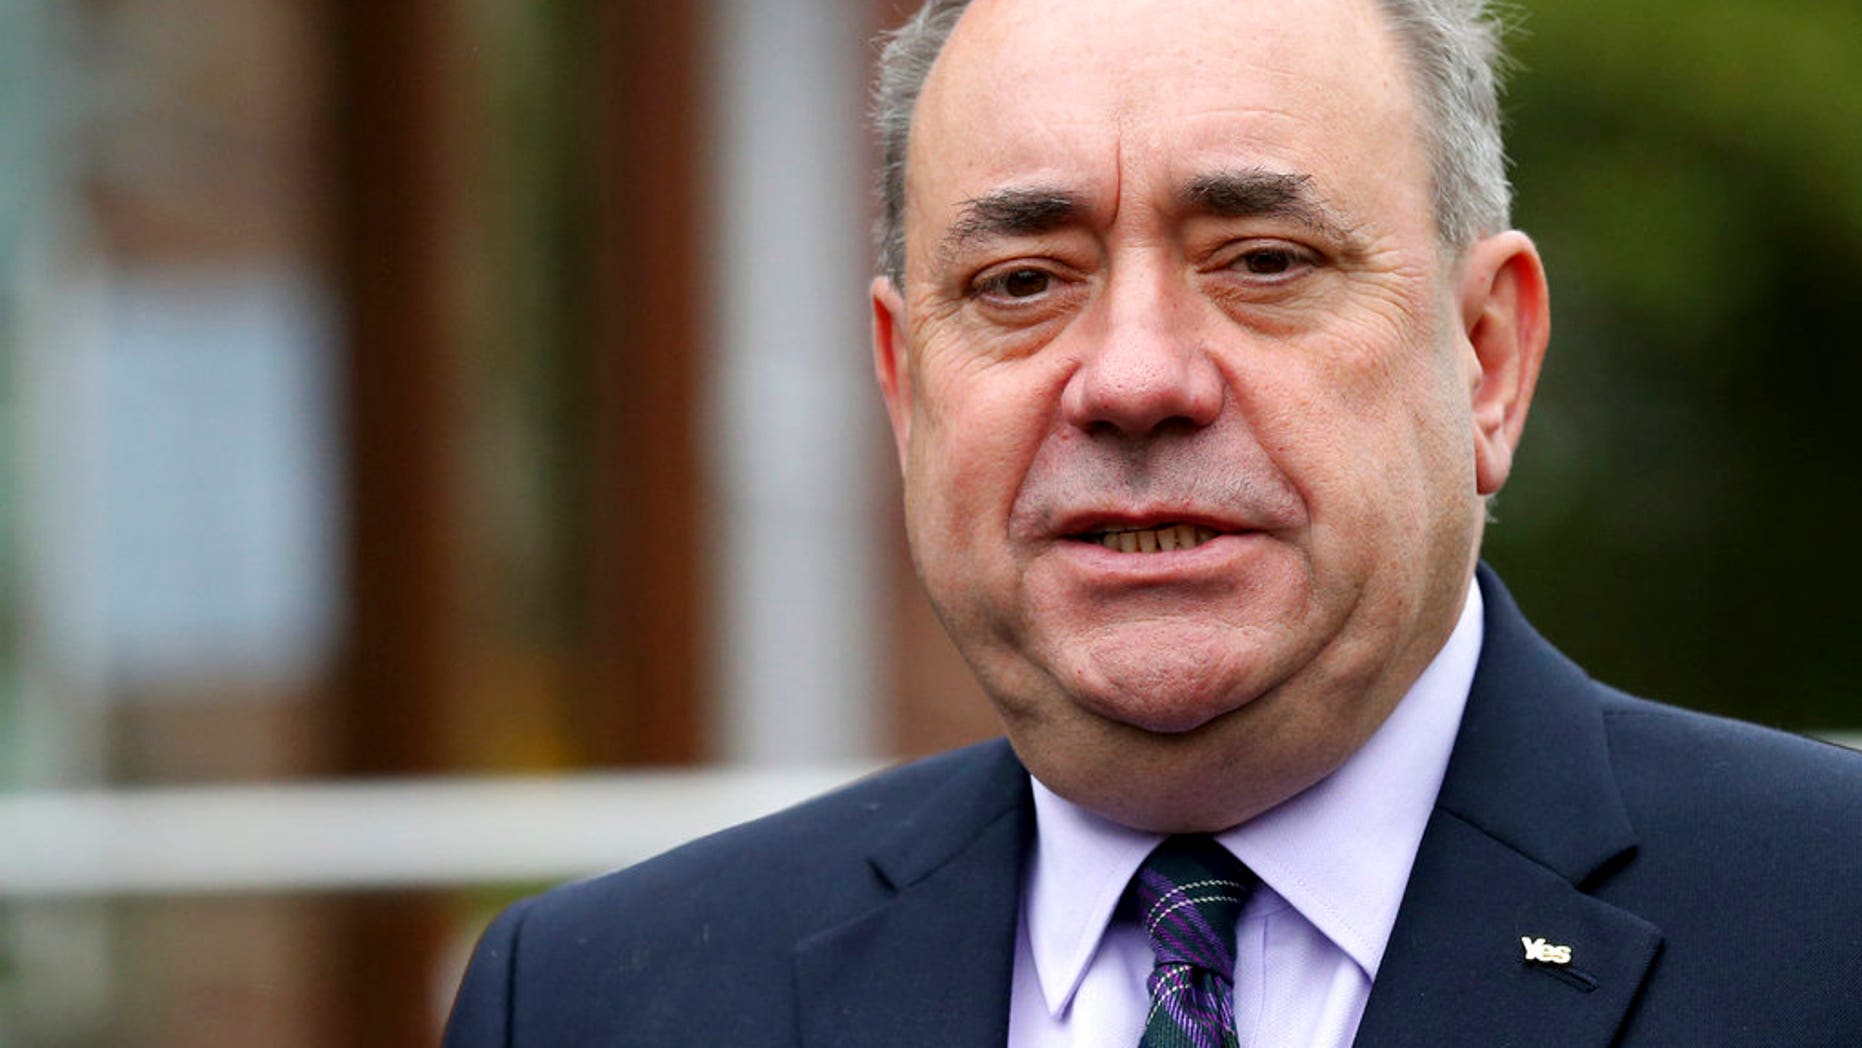 Former Scottish leader Alex Salmond charged with attempted rape, sexual assault